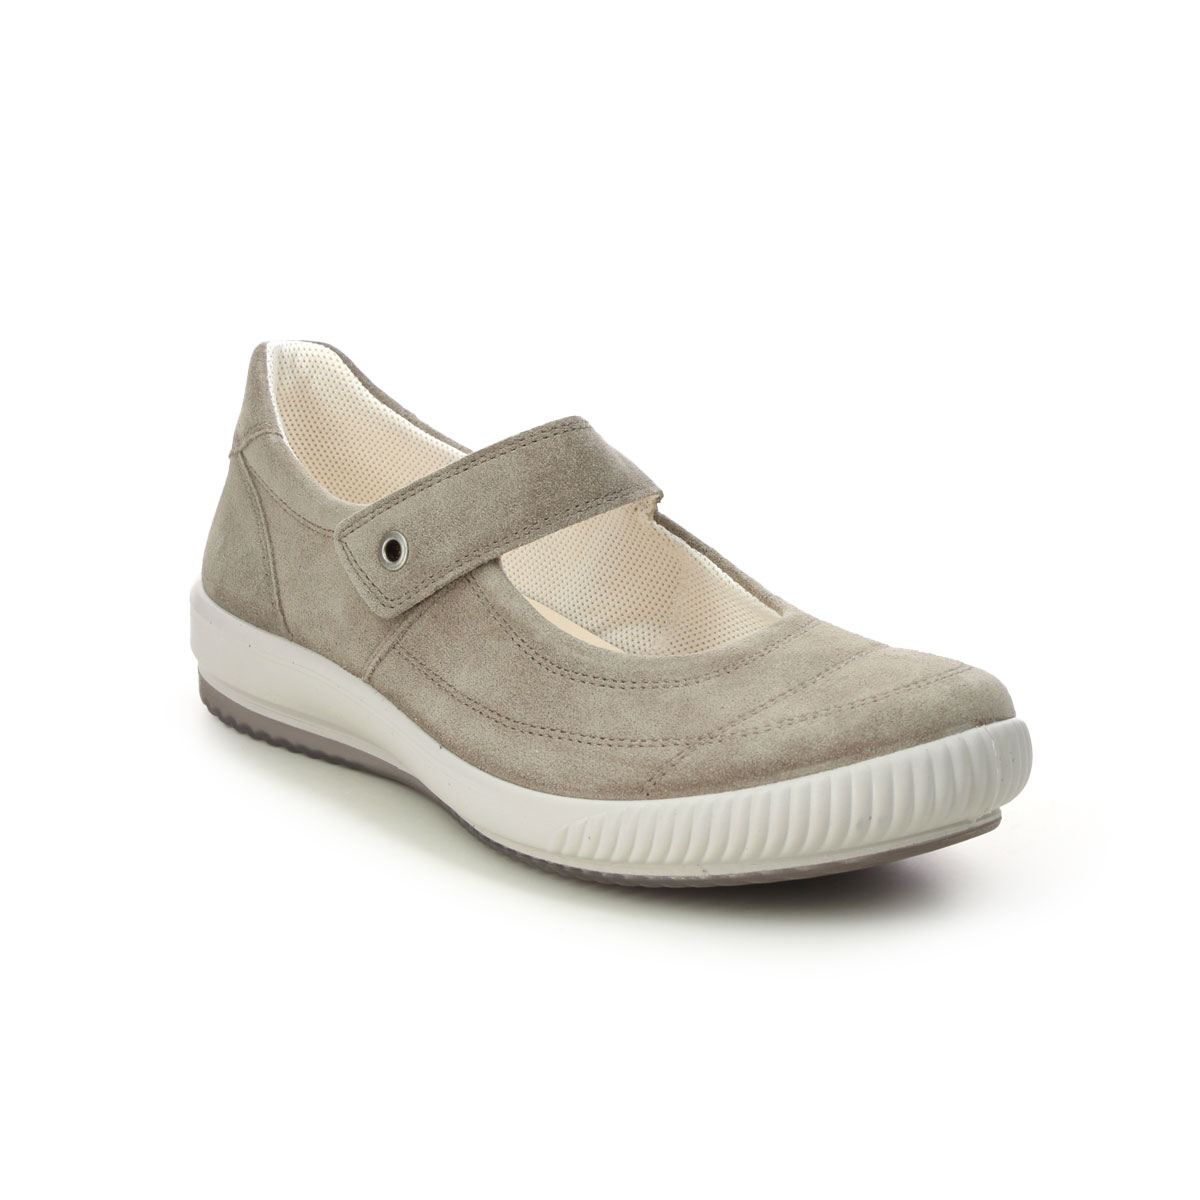 Legero Tanaro Bar Beige suede Womens Mary Jane Shoes 2000300-4500 in a Plain Leather in Size 5